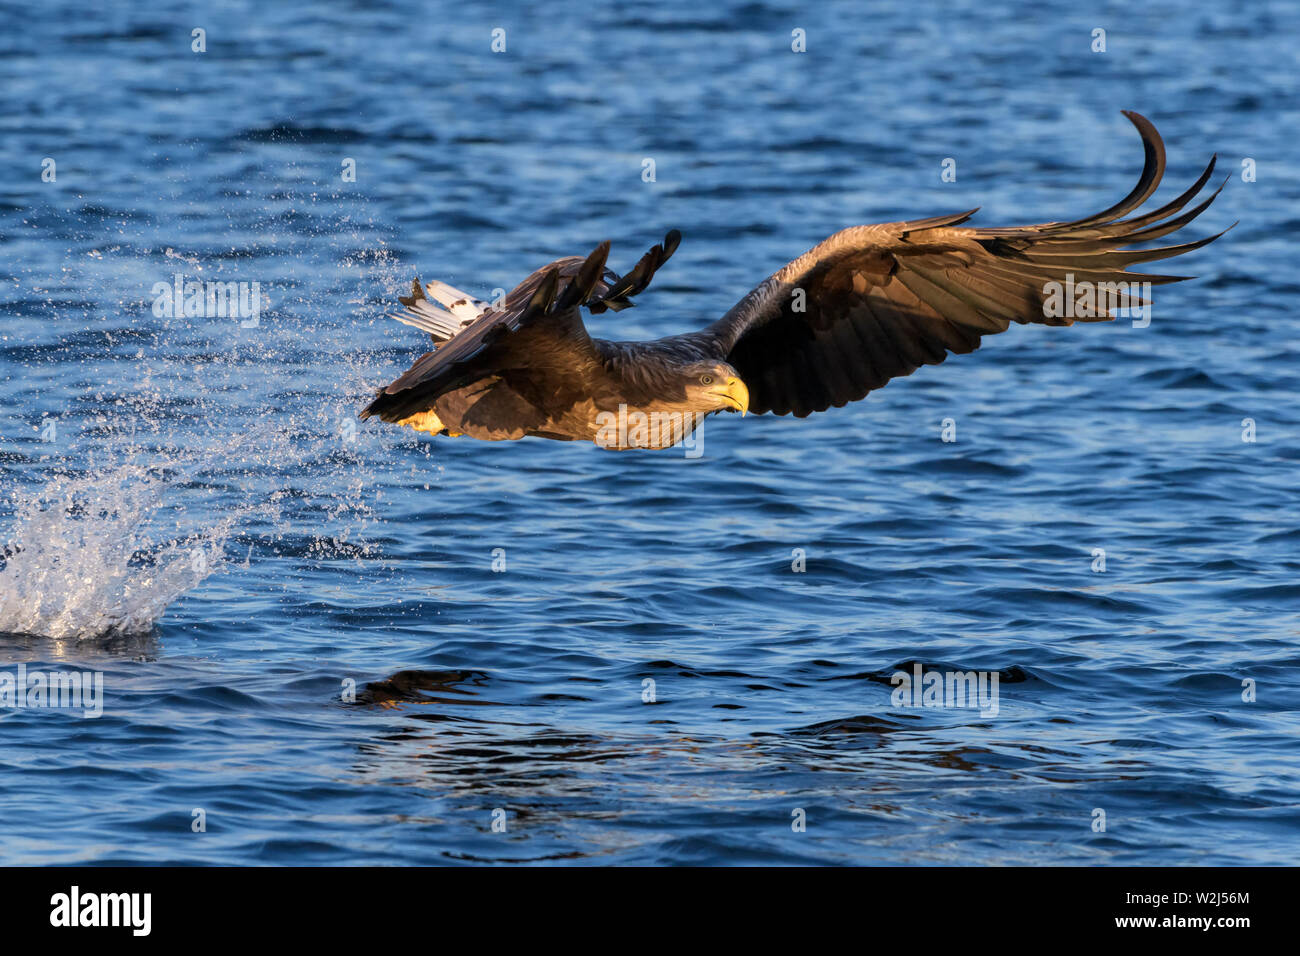 White-tailed sea eagle (Haliaeetus albicilla) in flight, hunting and catching fish, Flatanger, Norway Stock Photo